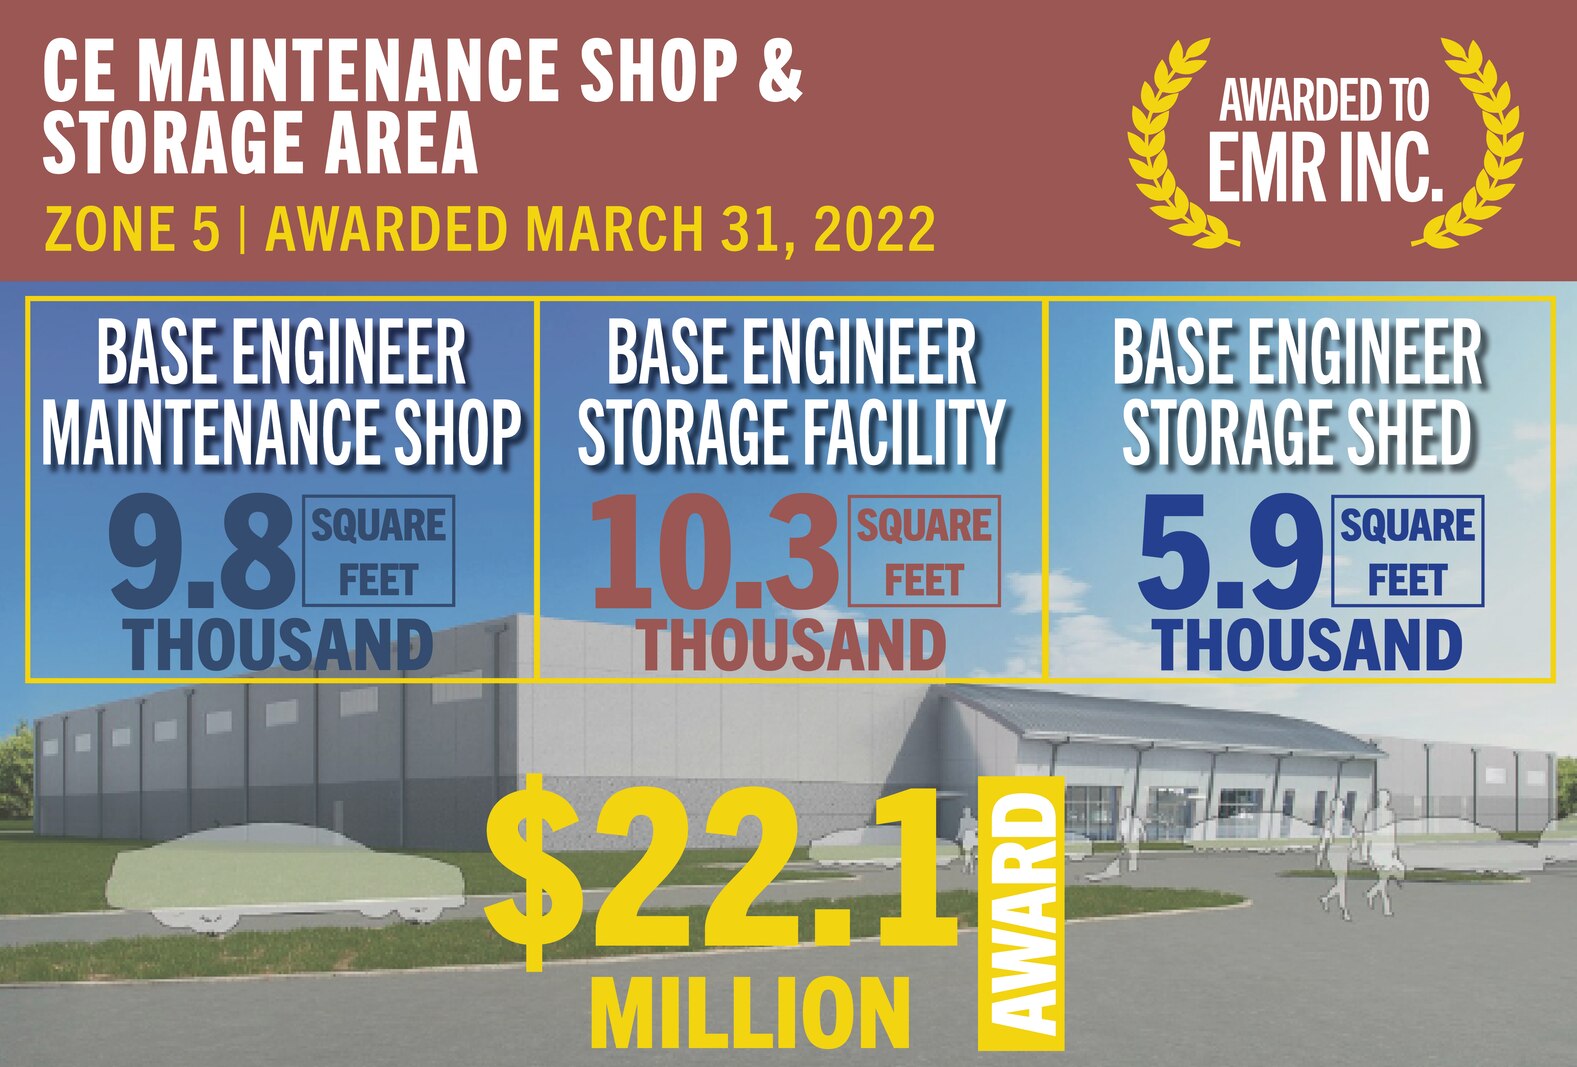 Summary of contract award for CE maintenance shop and storage